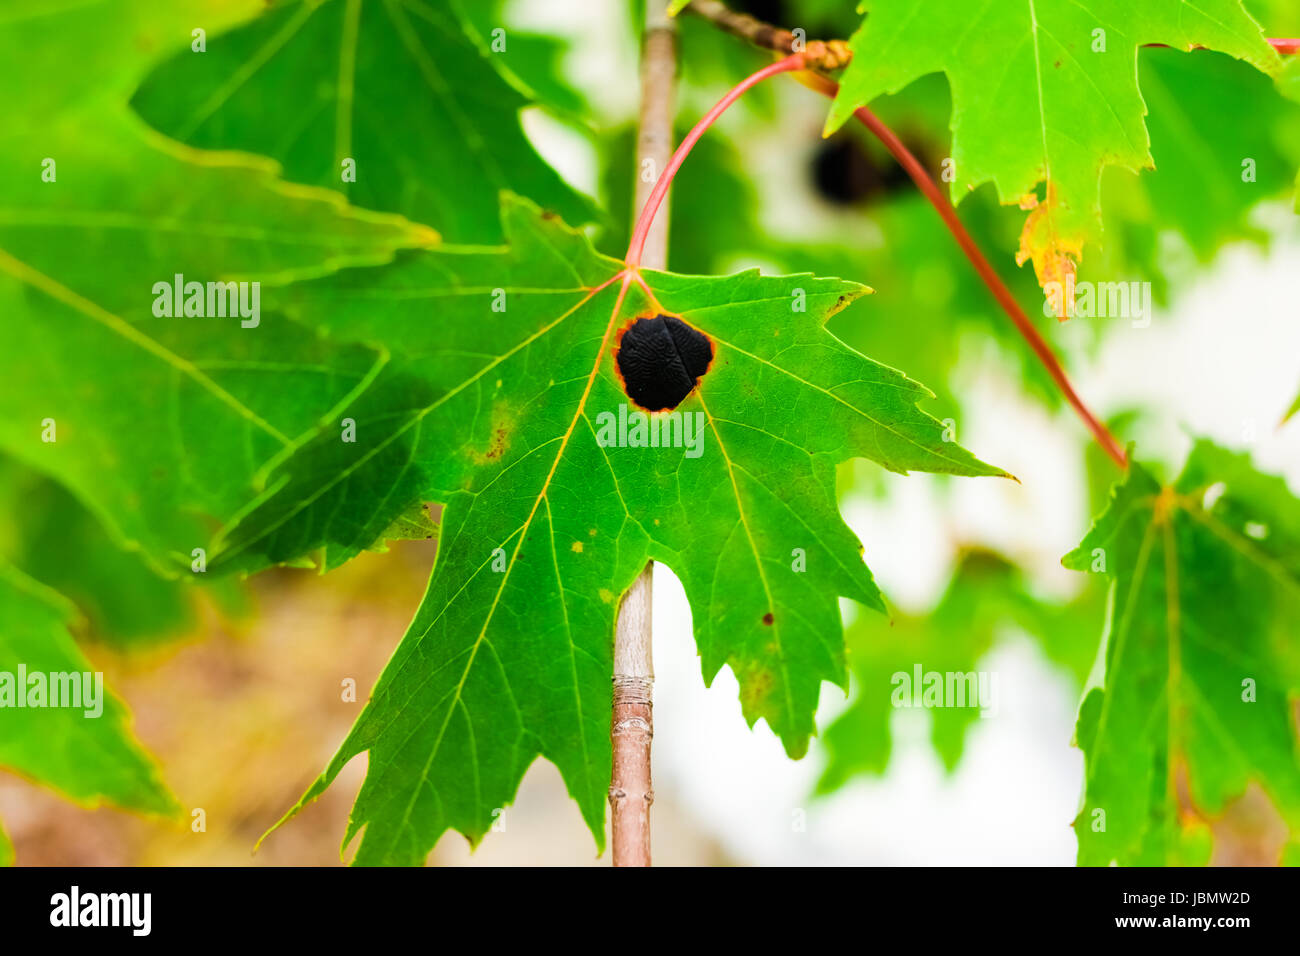 Black Tarry Spot on a Maple Leaf Called the 'Goudronneuse' is a Microscopic Fungus Infection Affecting the Norway Maple in Canada Stock Photo